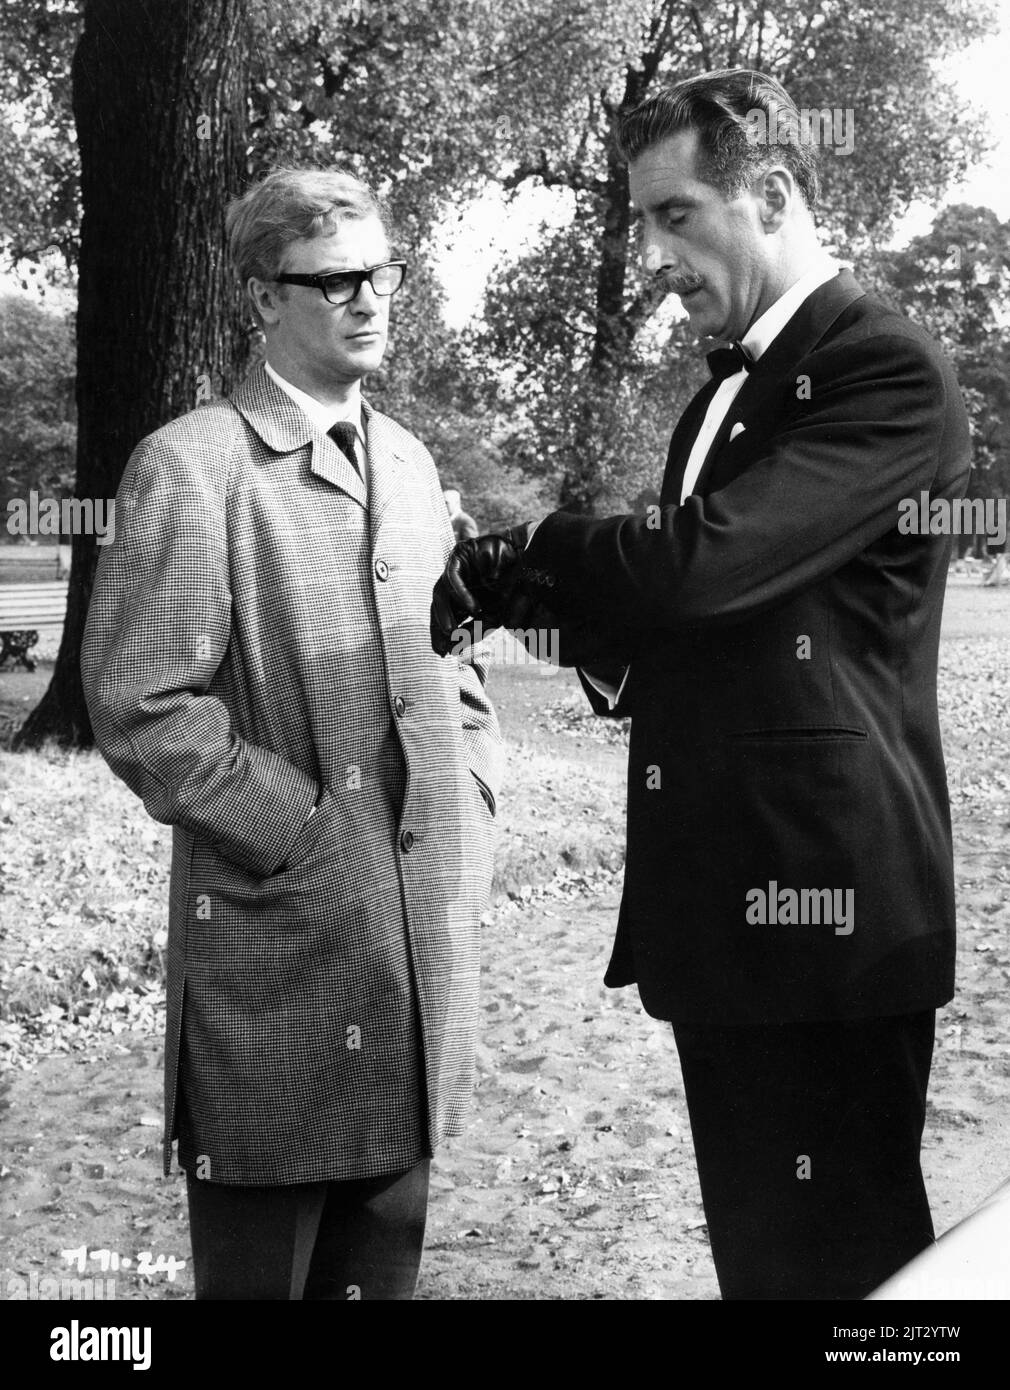 MICHAEL CAINE as Harry Palmer and NIGEL GREEN as Major Dalby in THE IPCRESS FILE 1965 director SIDNEY J. FURIE novel Len Deighton music John Barry producer Harry Saltzman The Rank Organisation / Lowndes Productions Ltd. / Steven S.A. Stock Photo